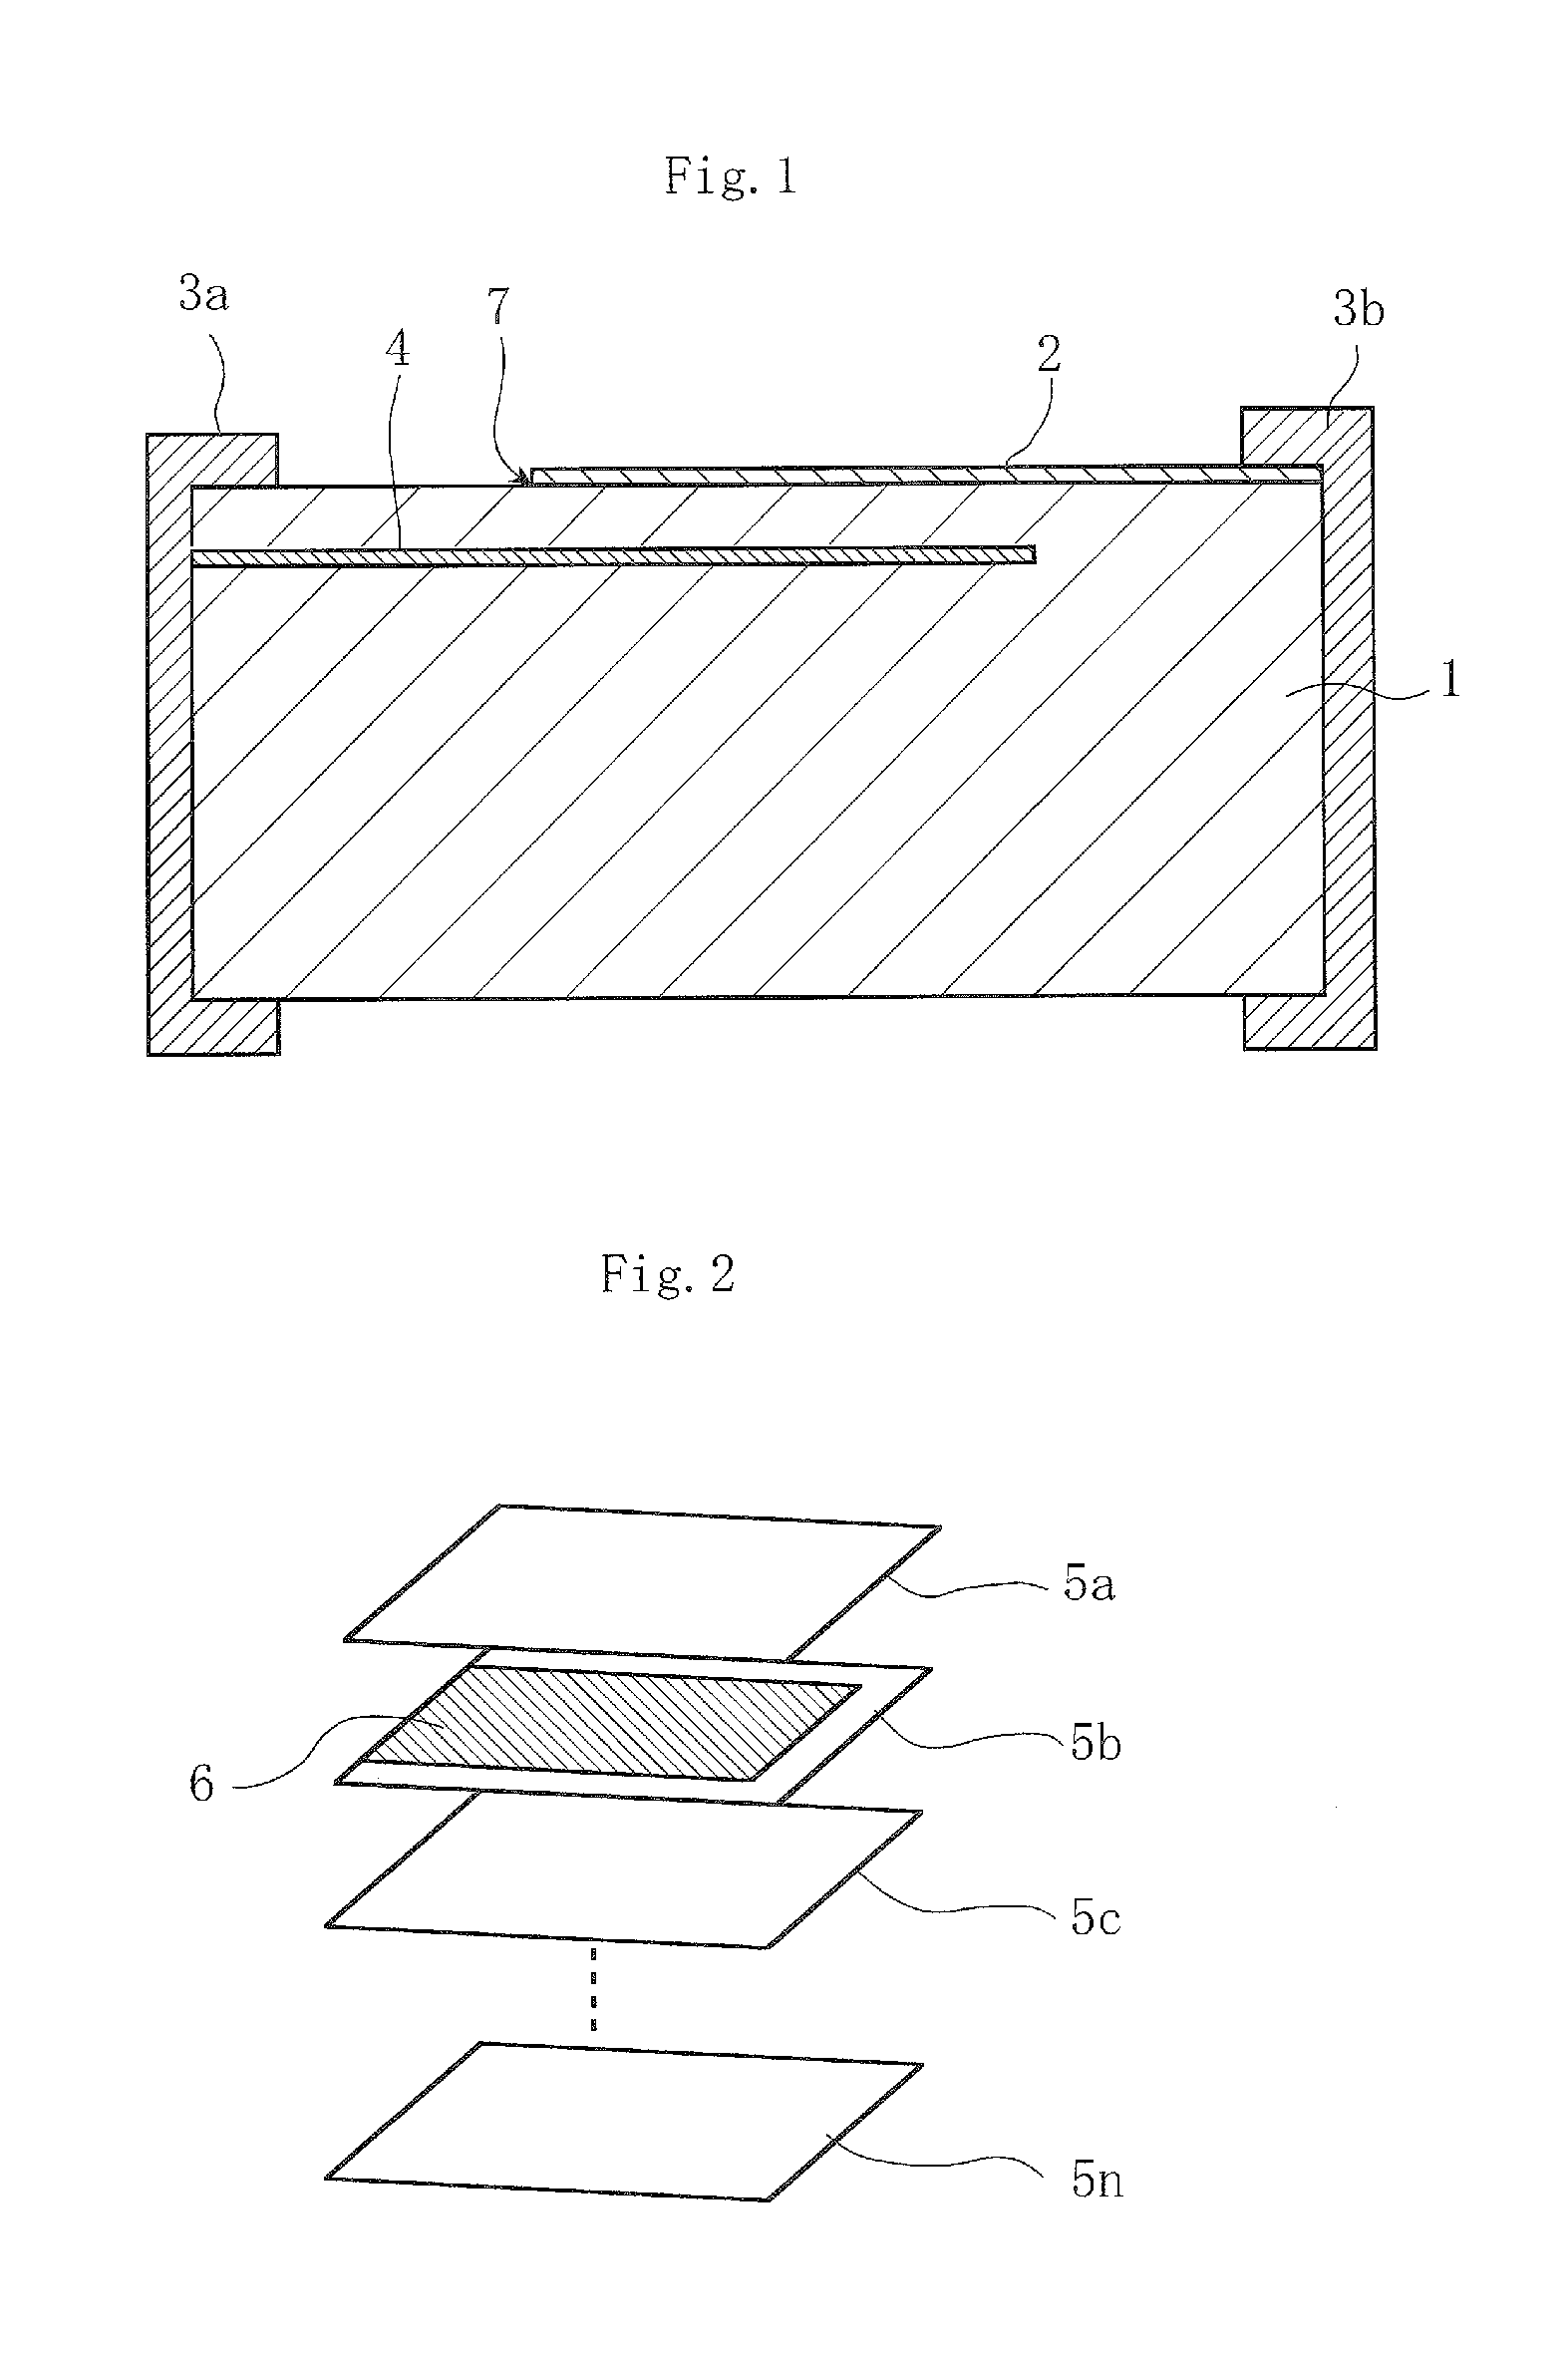 Gas sensor, method for manufacturing gas sensor, and method for detecting gas concentration